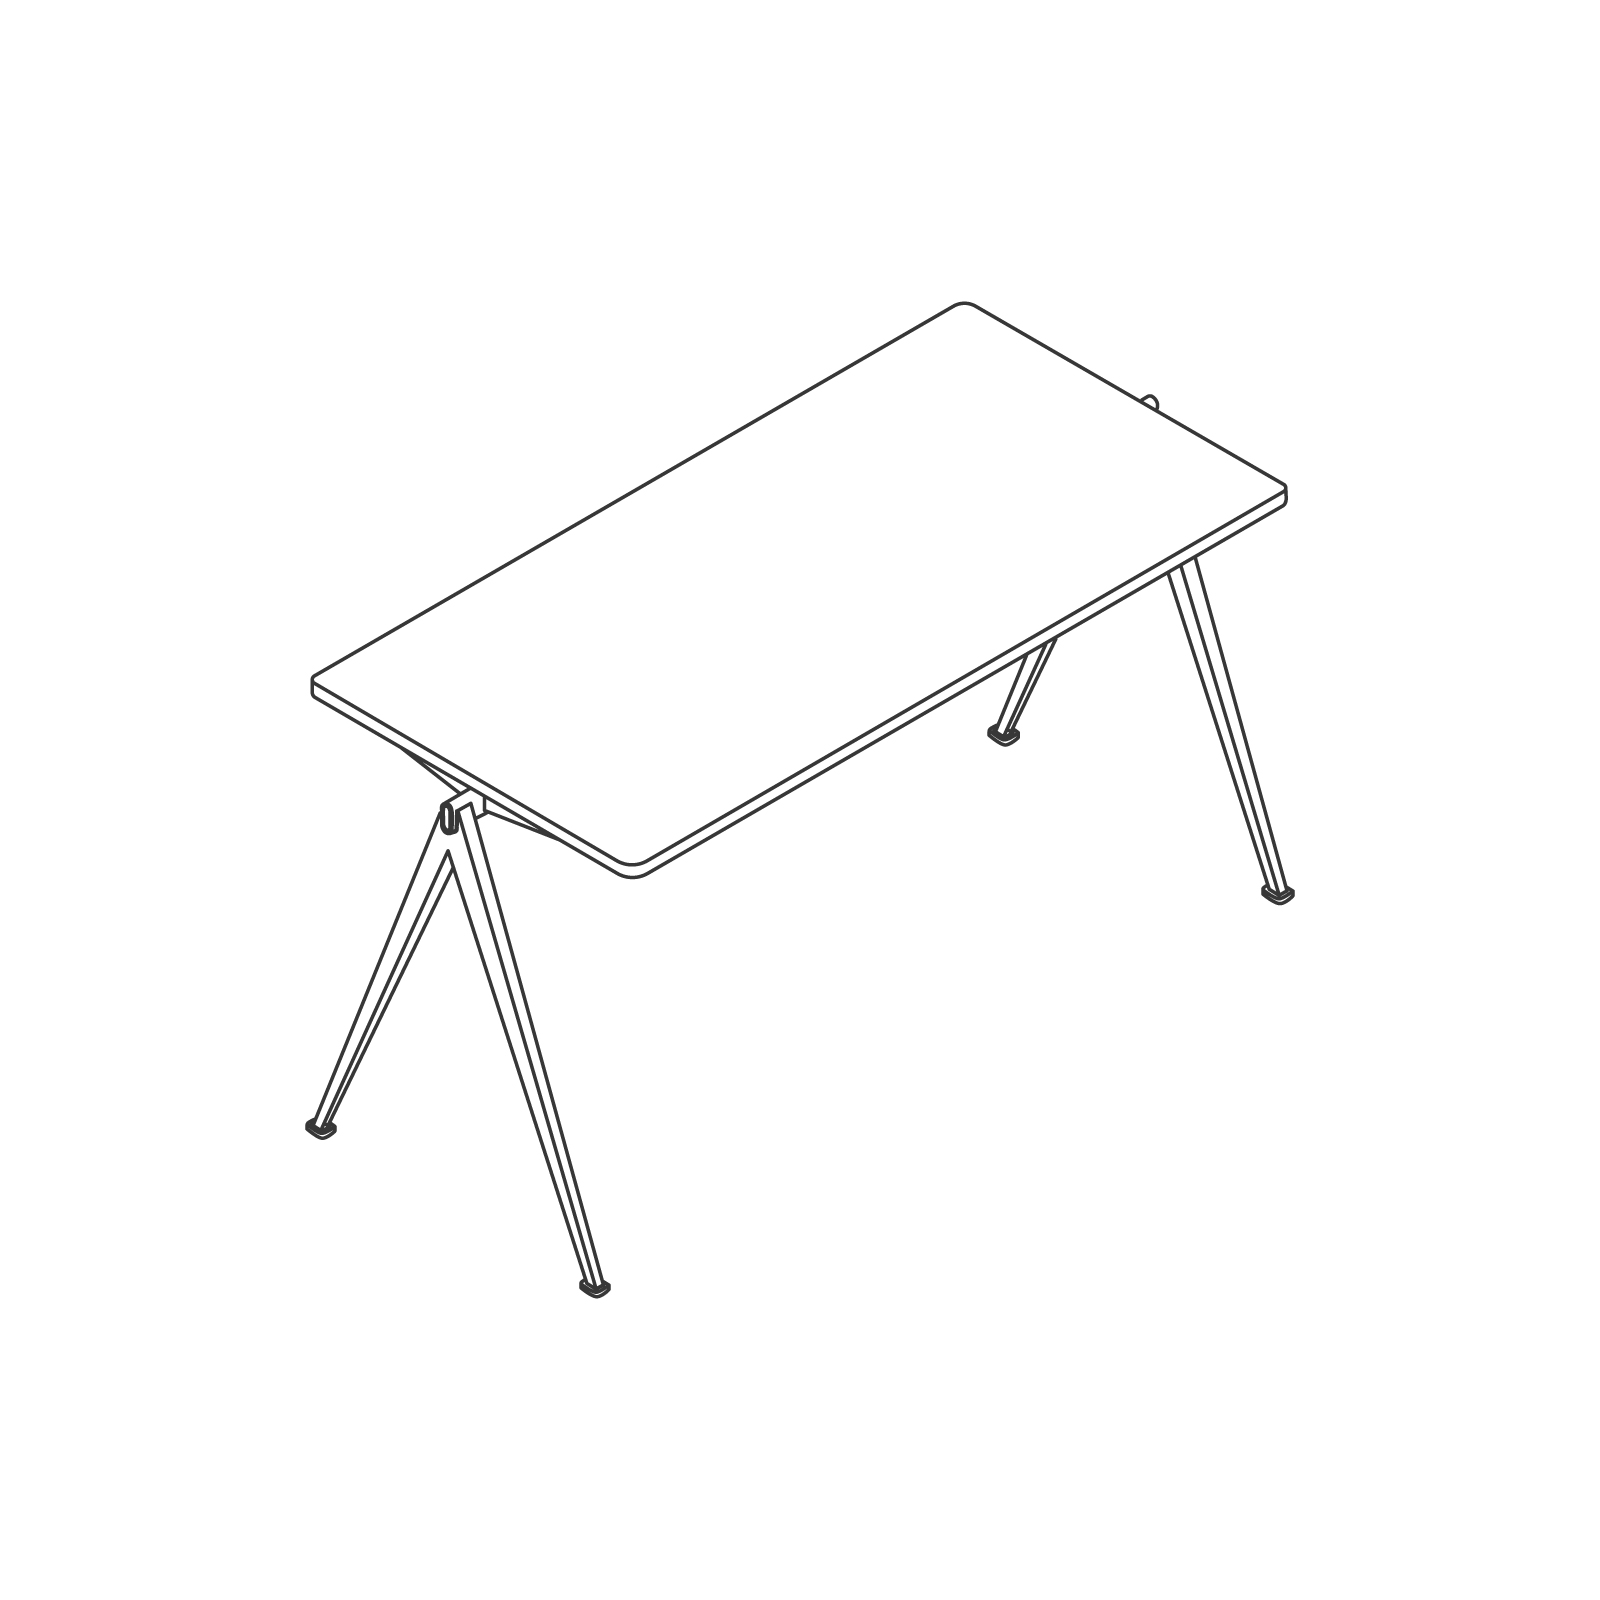 A line drawing - Pyramid Table